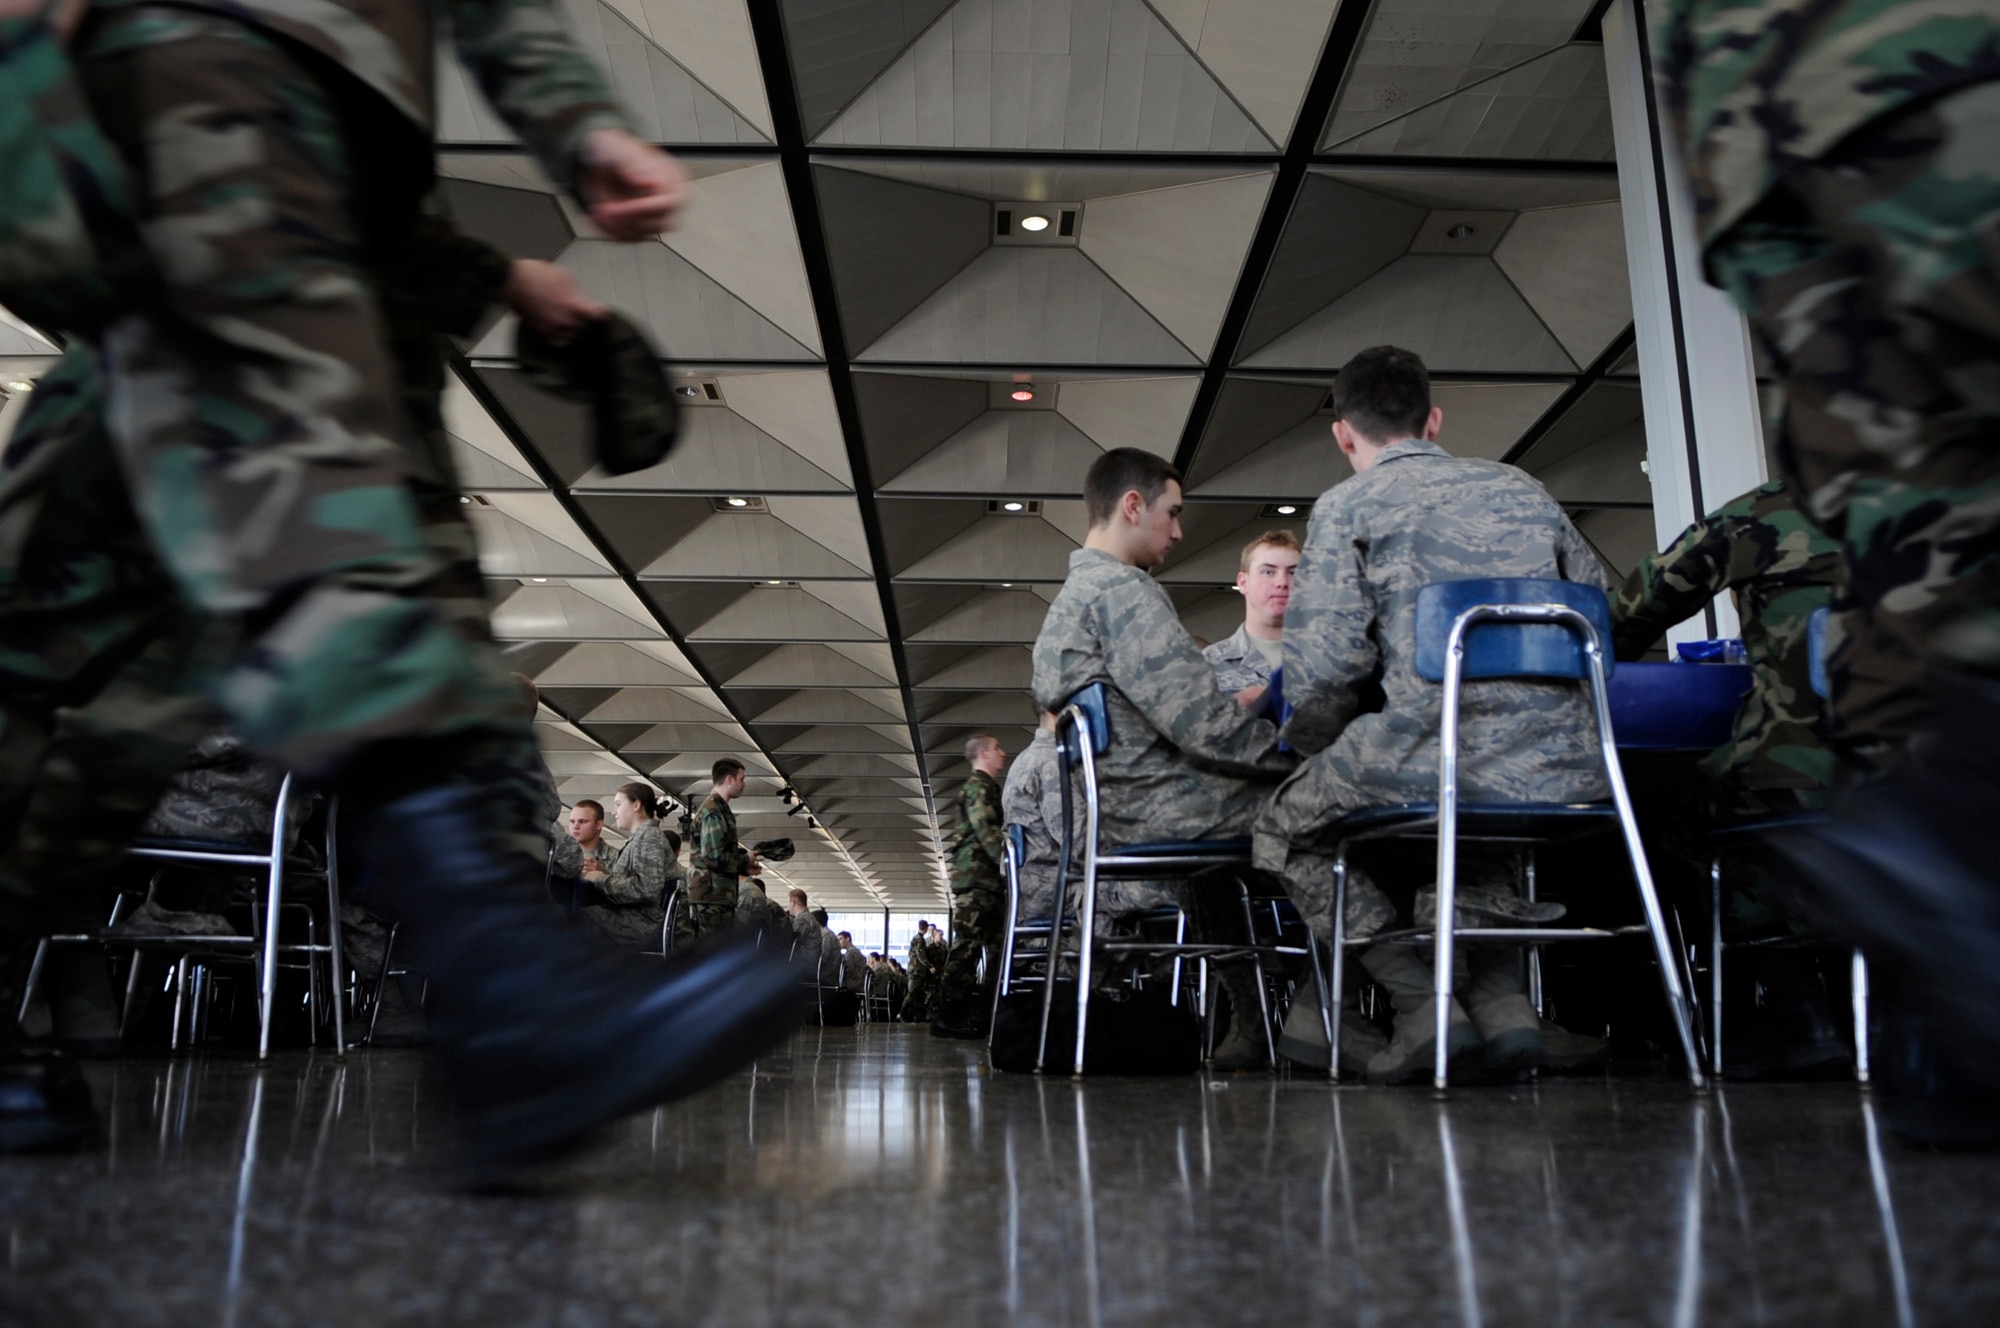 Cadets eat lunch Jan. 23 at Mitchell Hall Cadet Dining Facility at the U.S. Air Force Academy in Colorado Springs, Colo. The dining facility feeds approximately 4450 cadets and sits on 1.75 acres. (U.S Air Force photo/Staff Sgt. Desiree N. Palacios)

